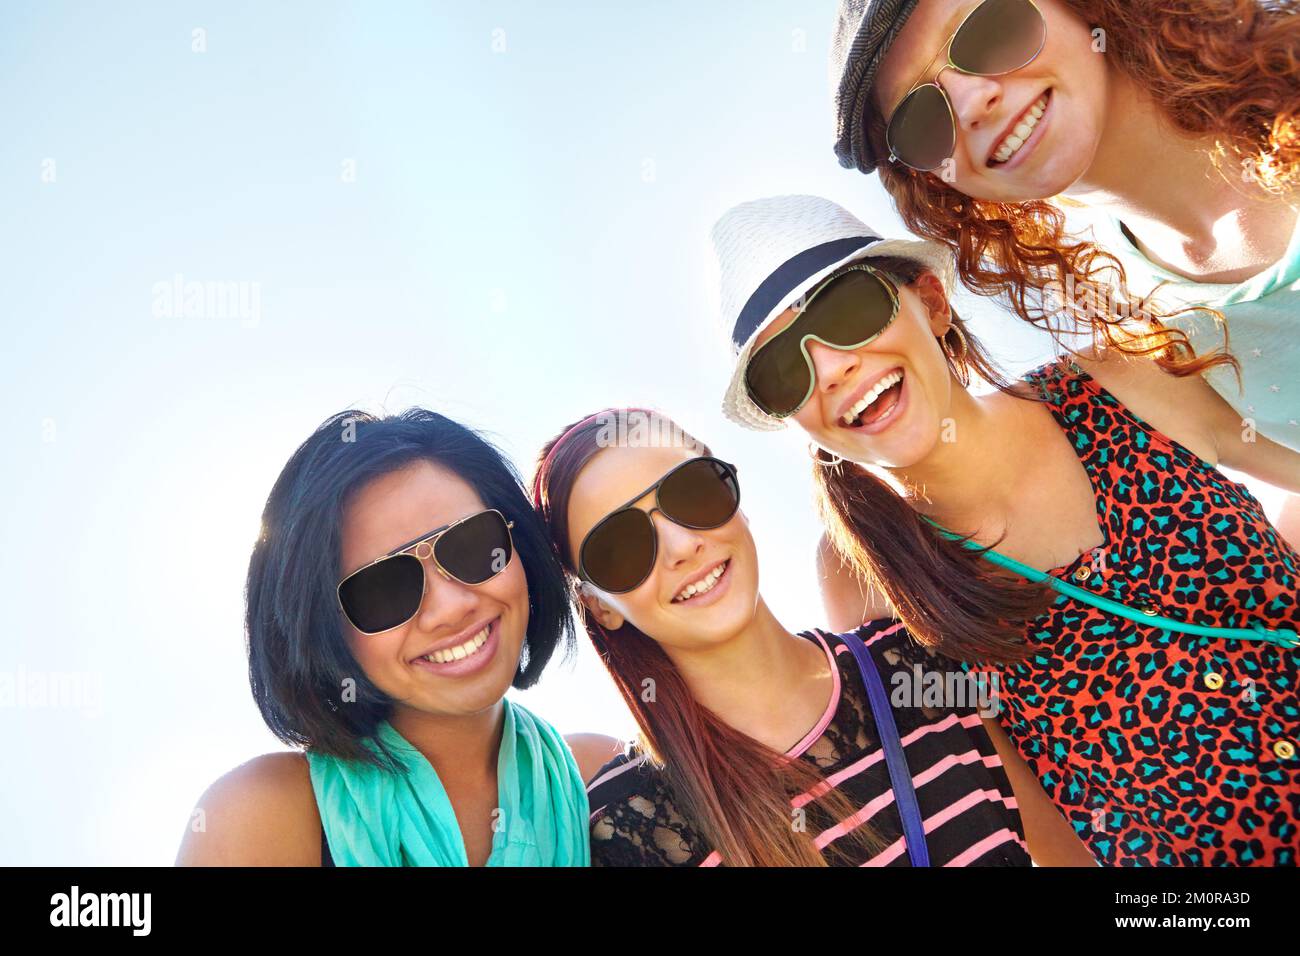 Life is nothing without friendship. A group of four teenage girls smiling with their arms around each others shoulders. Stock Photo